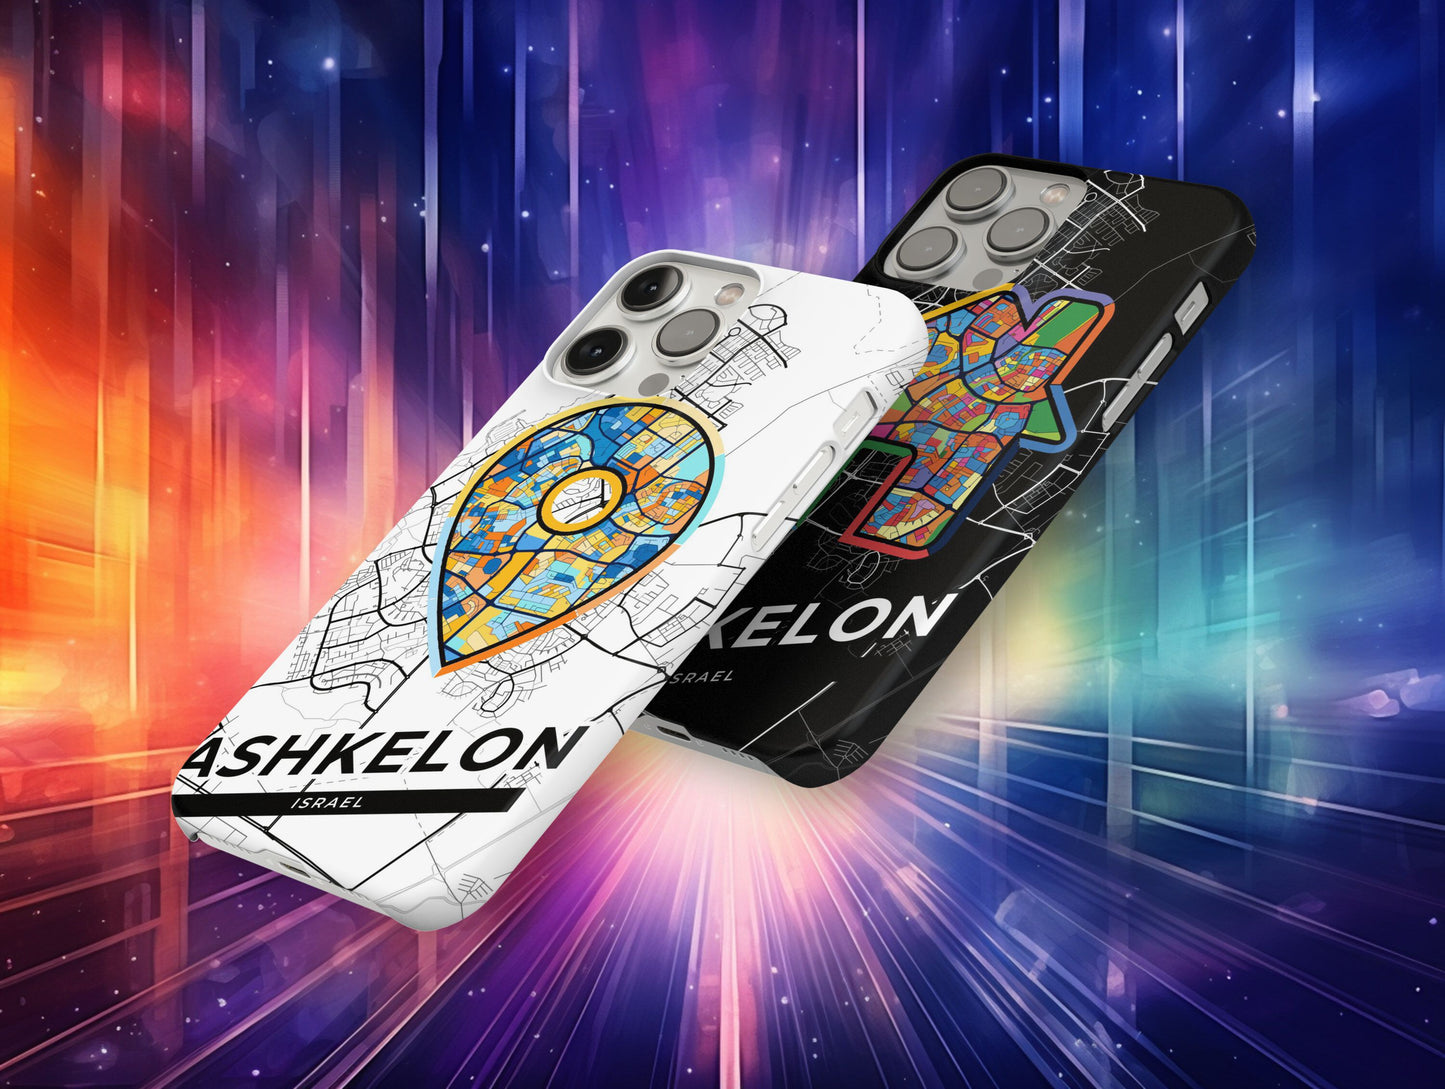 Ashkelon Israel slim phone case with colorful icon. Birthday, wedding or housewarming gift. Couple match cases.